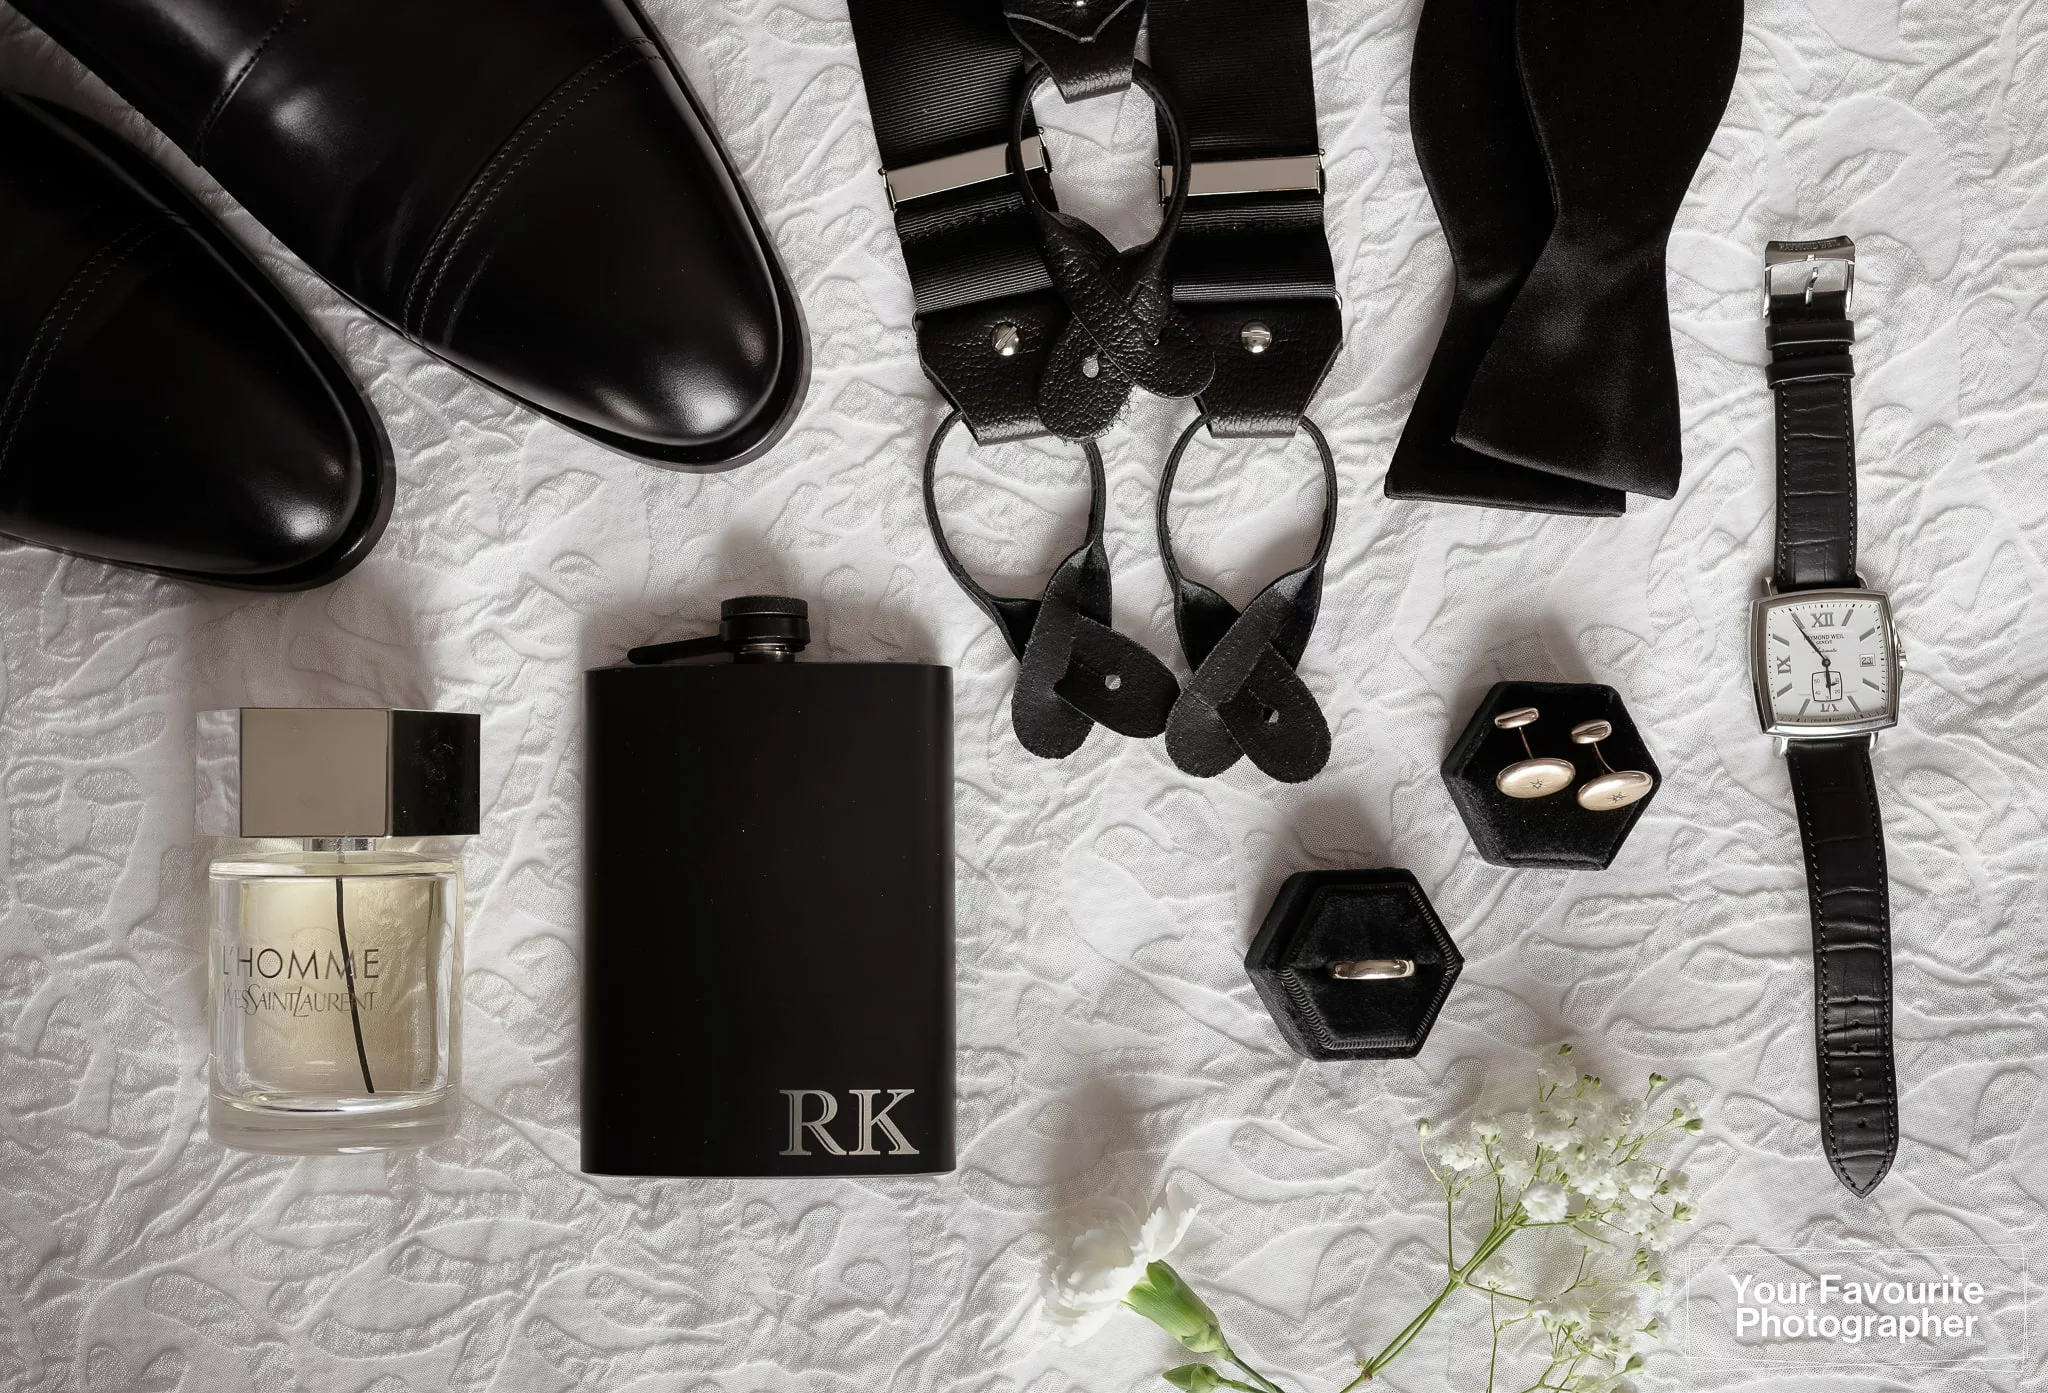 Flat lay of a groom's wedding accessories including YSL cologne, flask, wedding band, cufflinks, watch, suspenders, and shoes